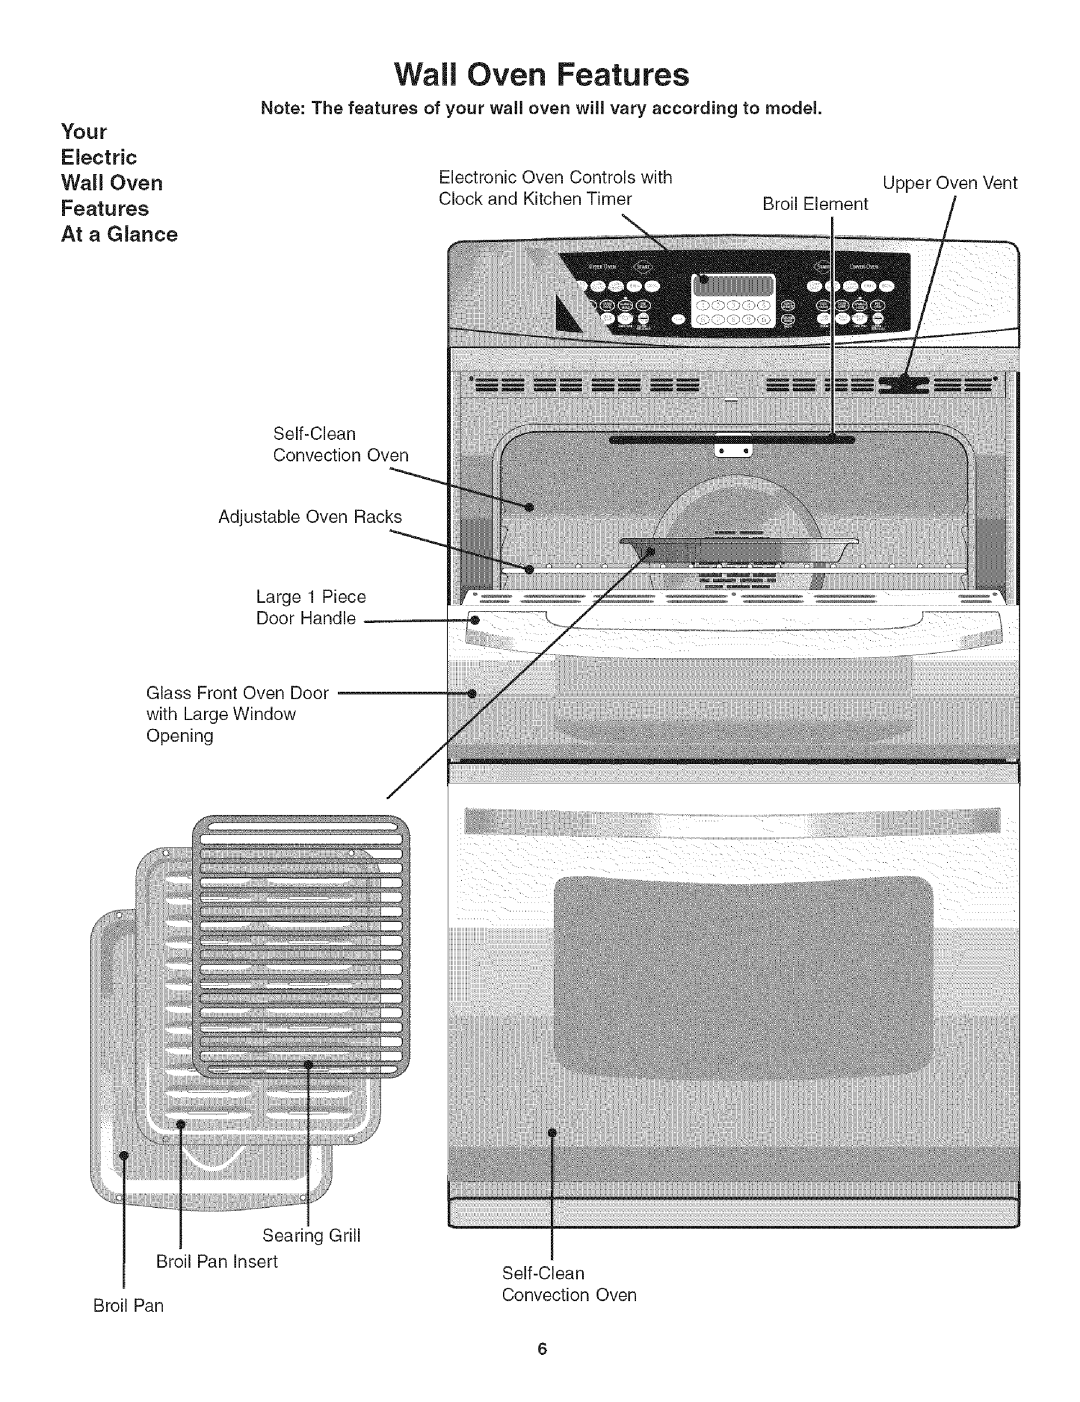 Kenmore 790.4906 manual Wall Oven Features, Your Electric, At a Glance 